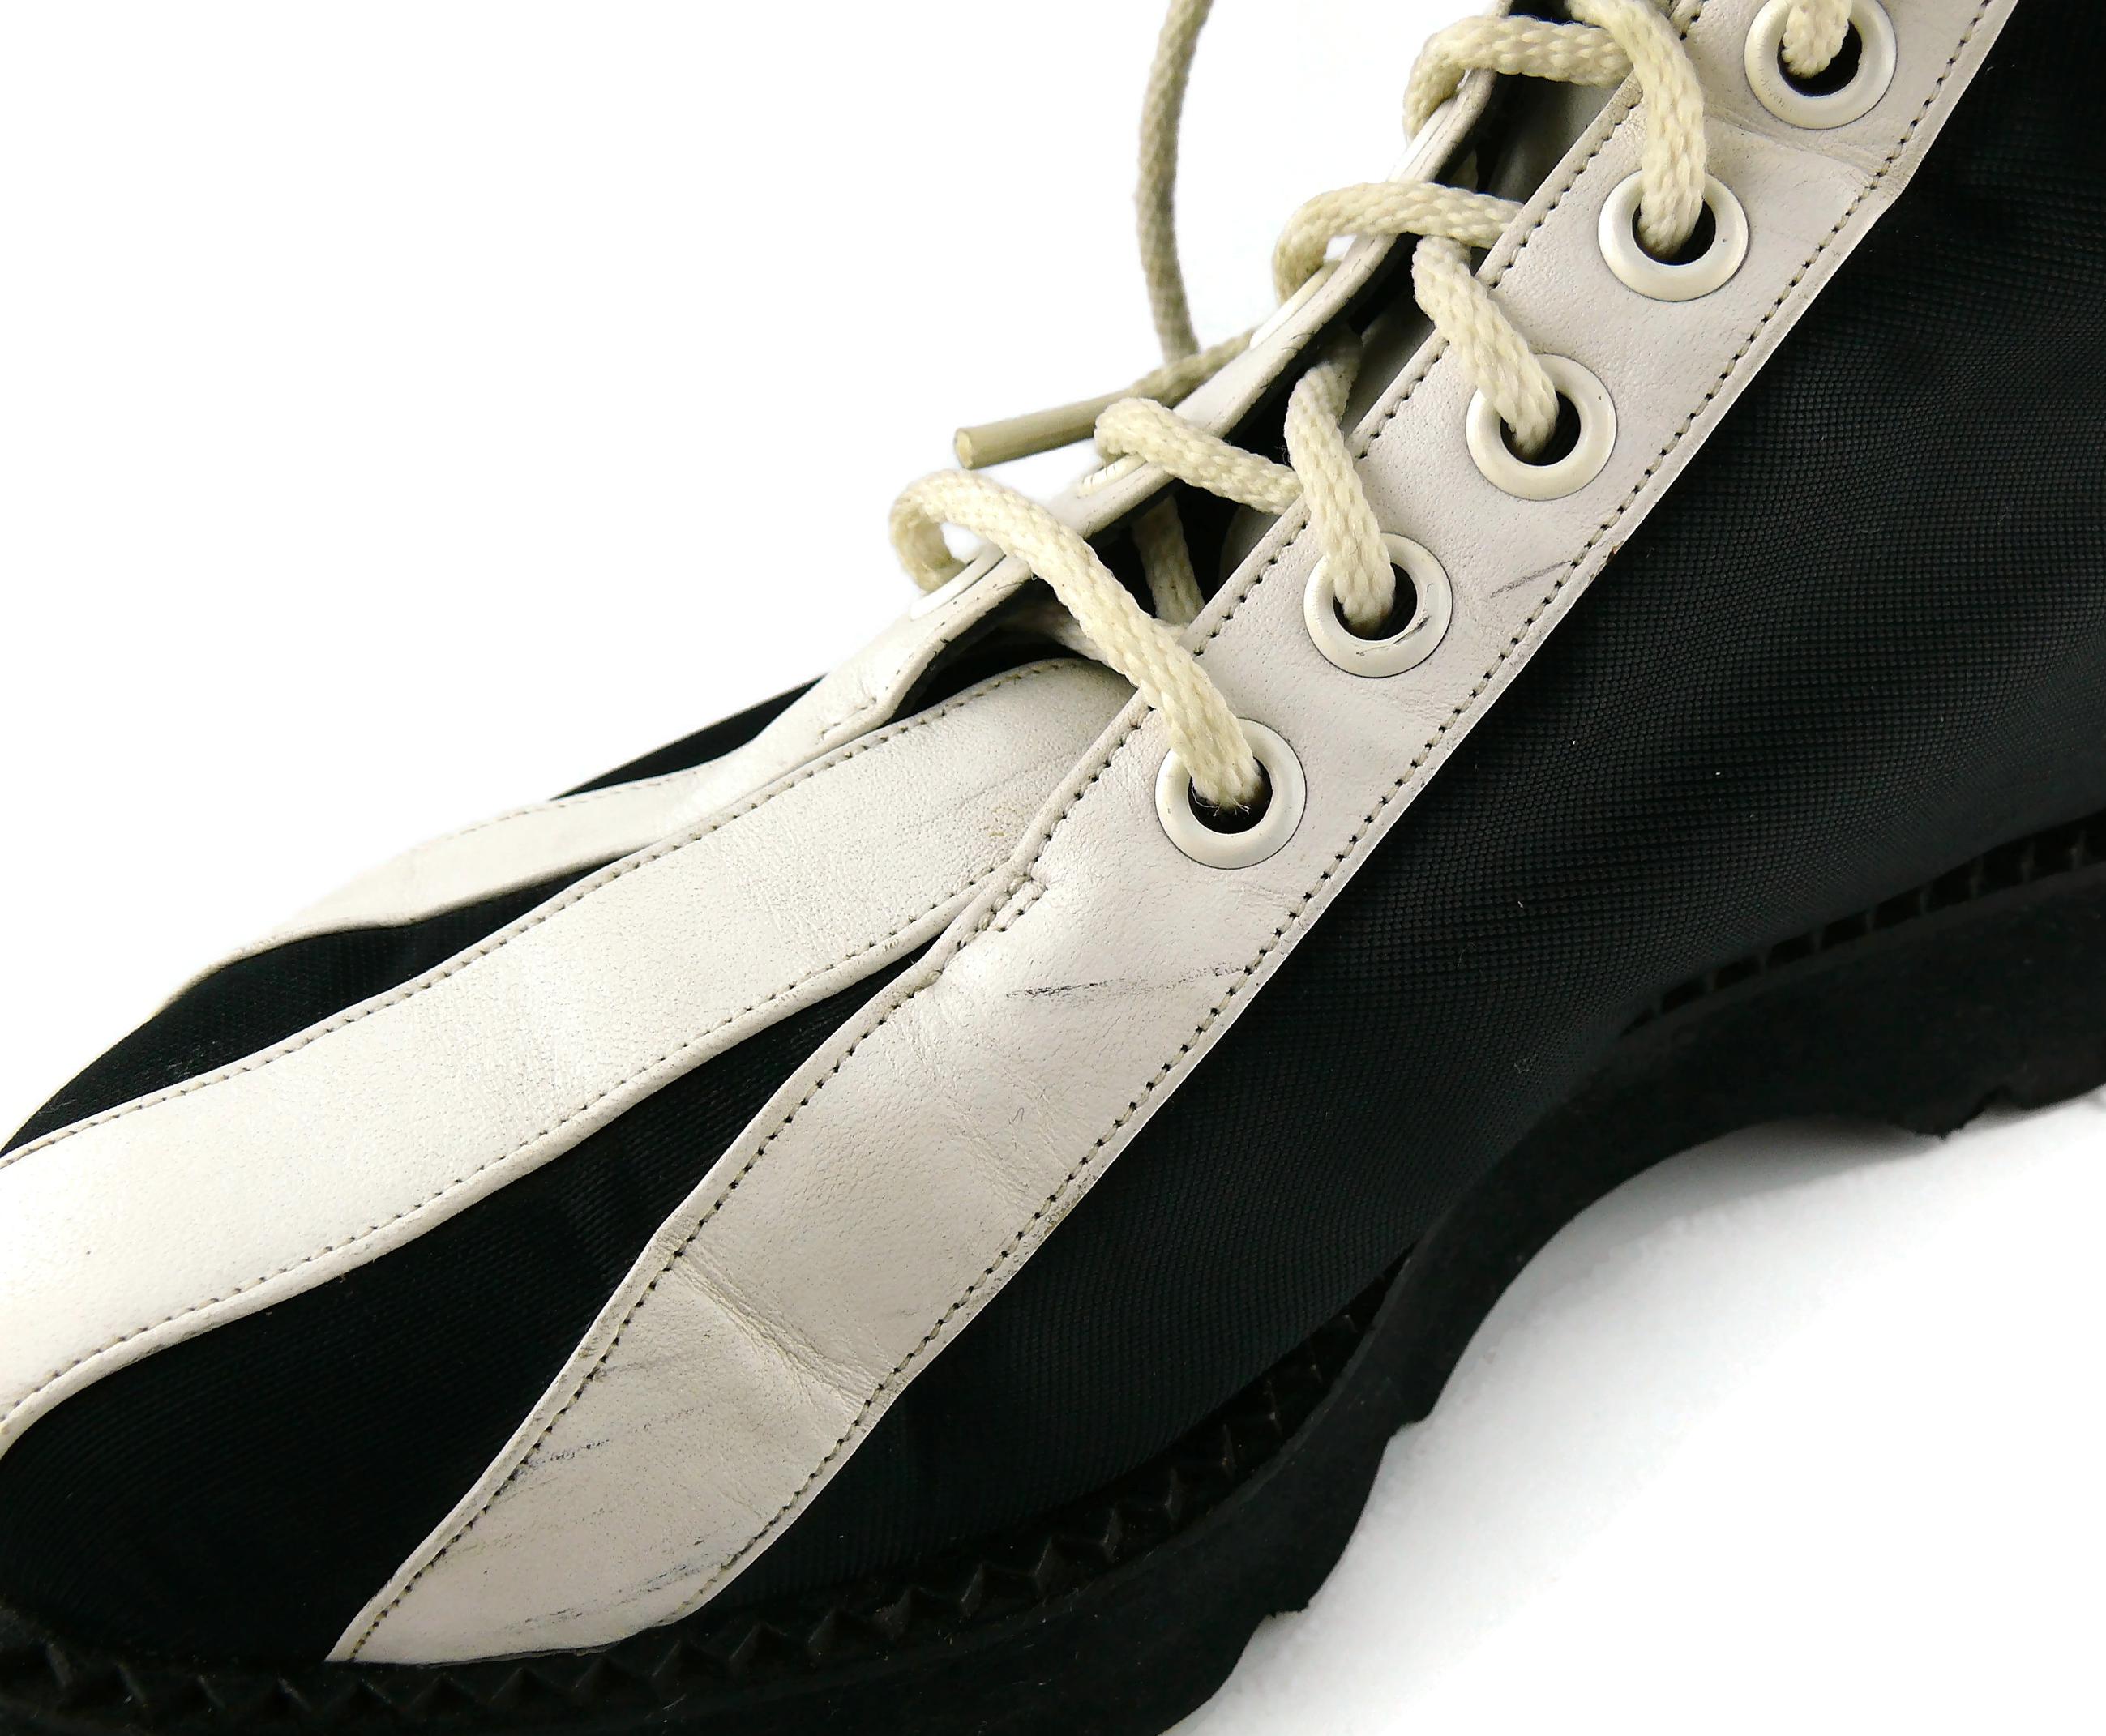 Karl Lagerfeld Vintage Black & White Lace Up Combat Boots 3